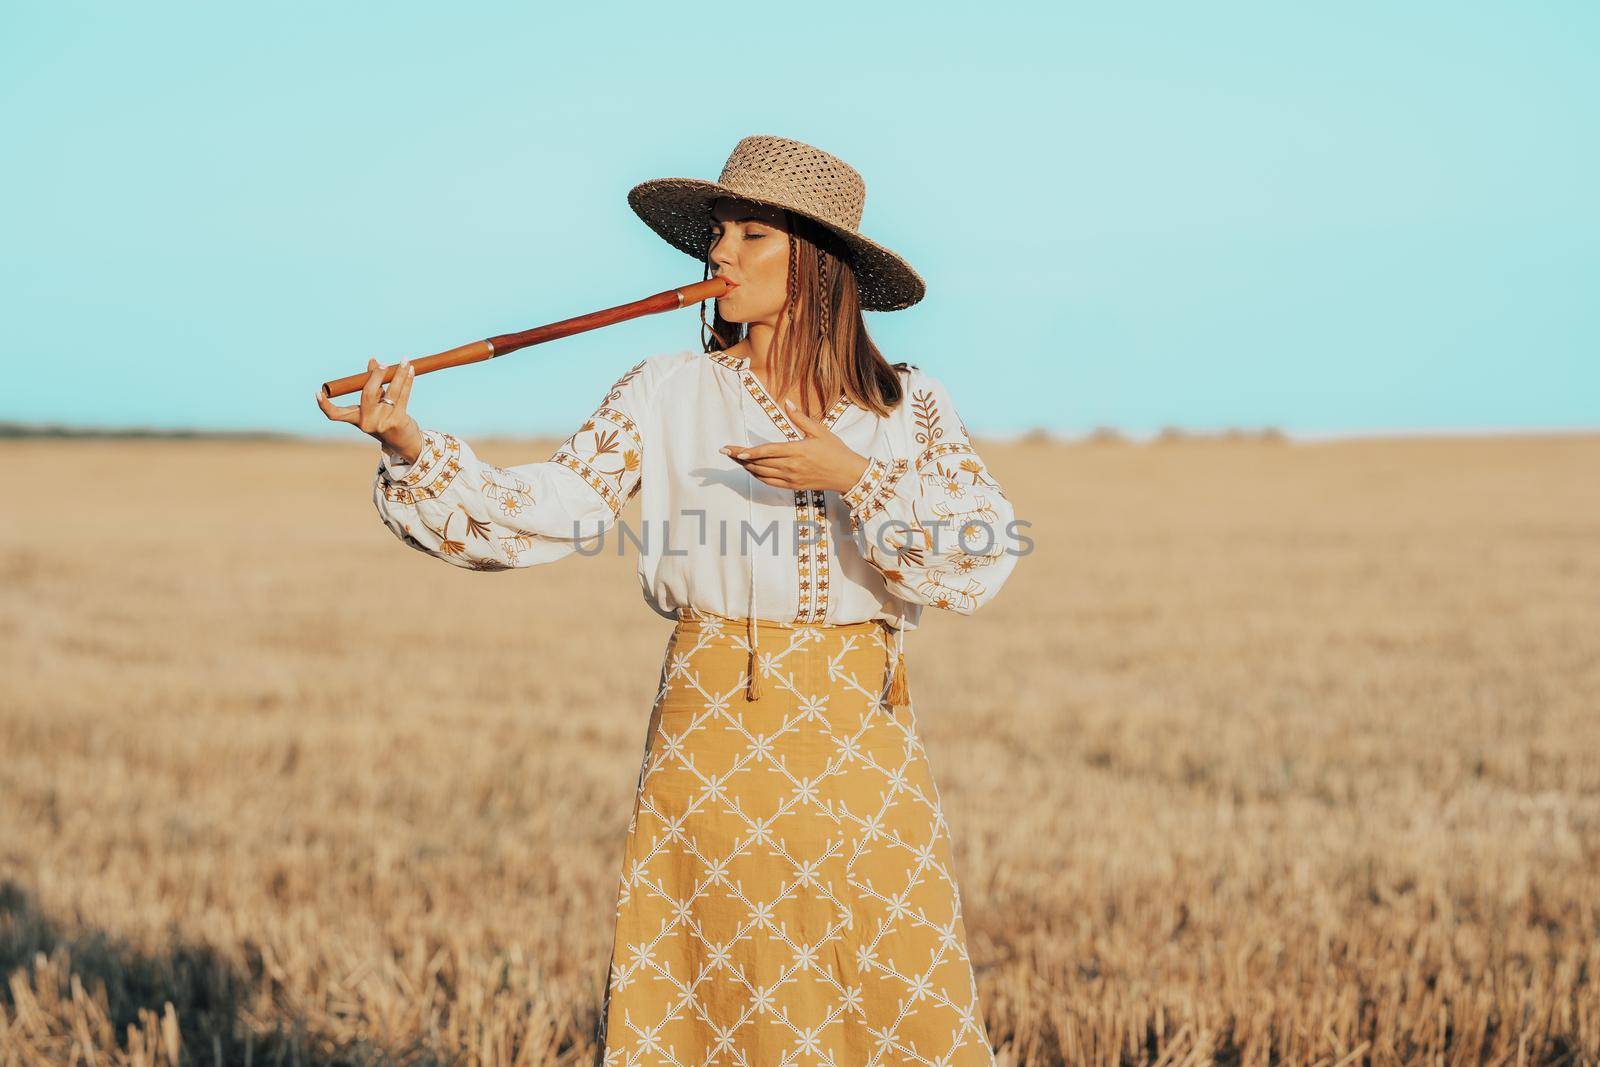 Woman playing on woodwind wooden flute - ukrainian telenka or tylynka in wheat field. Folk music concept. Musical instrument. Musician in traditional embroidered shirt - Vyshyvanka. High quality photo